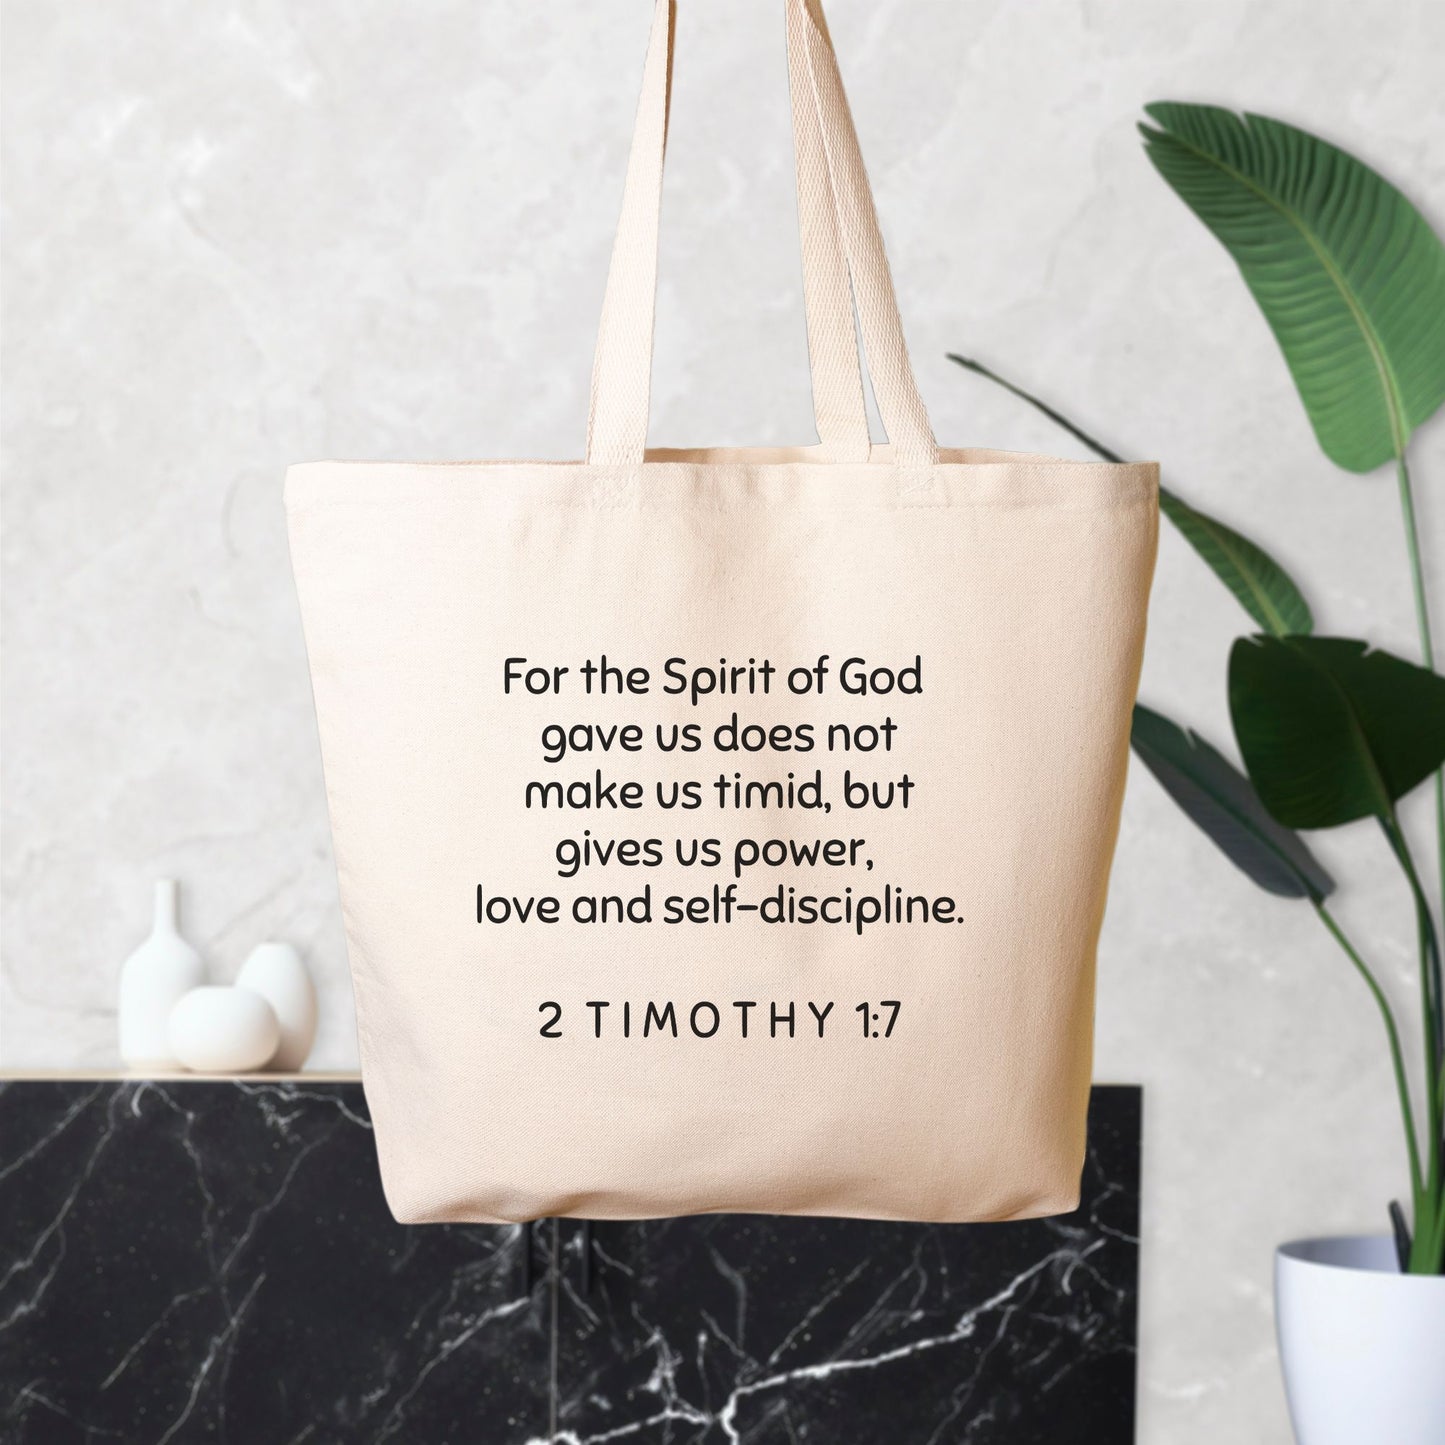 2 Timothy 1:7 Cotton Canvas Oversized Natural Tote